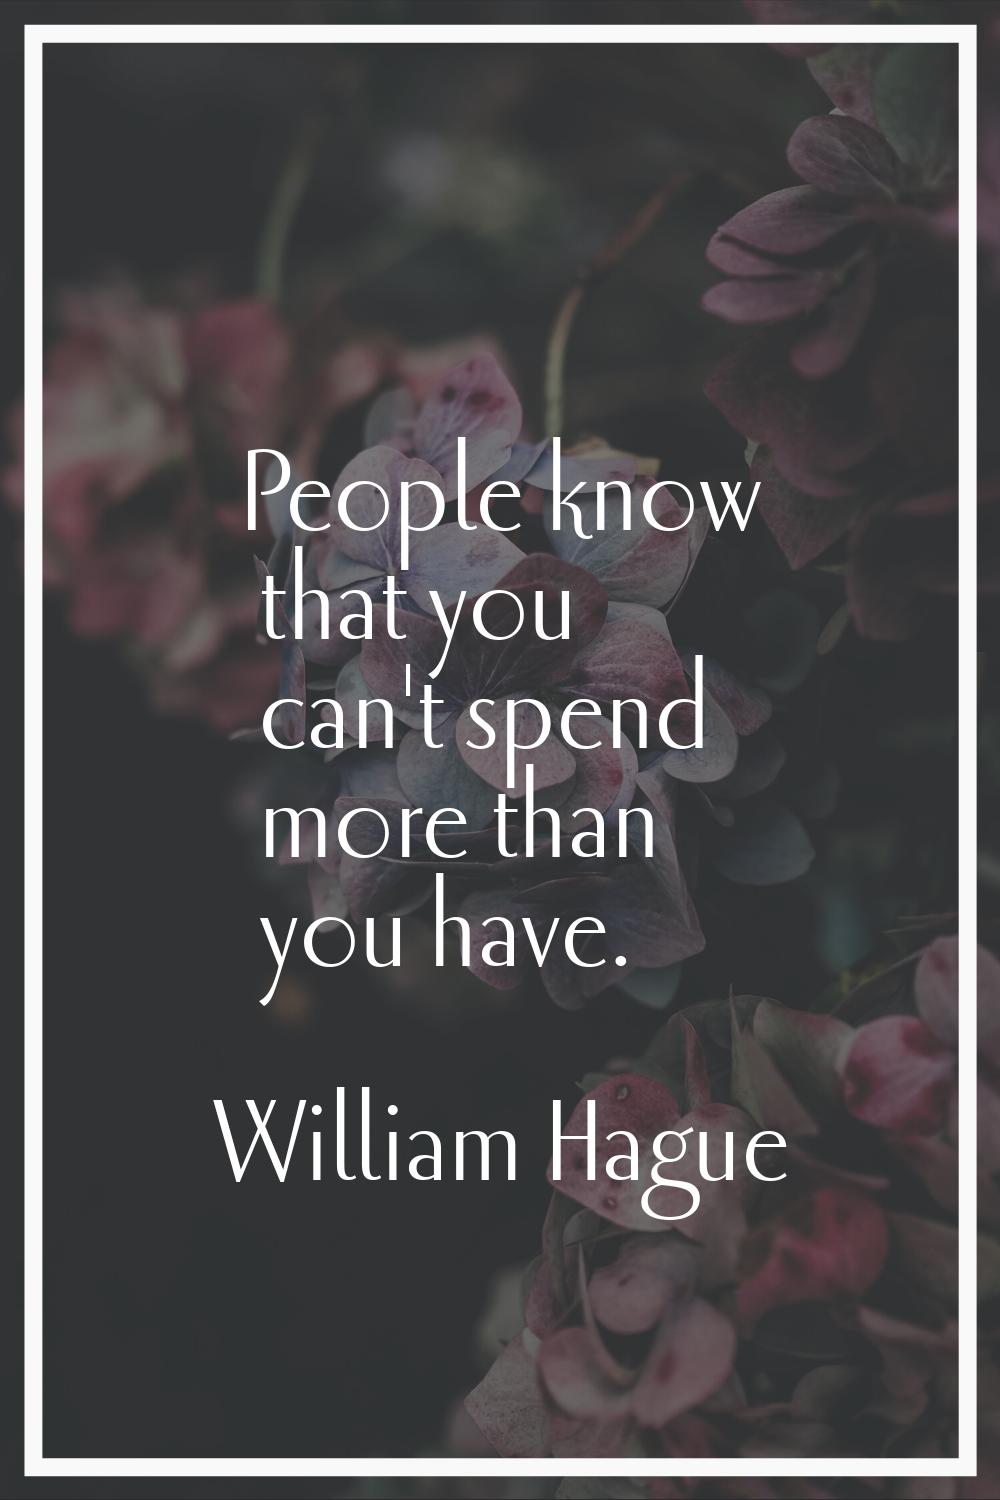 People know that you can't spend more than you have.